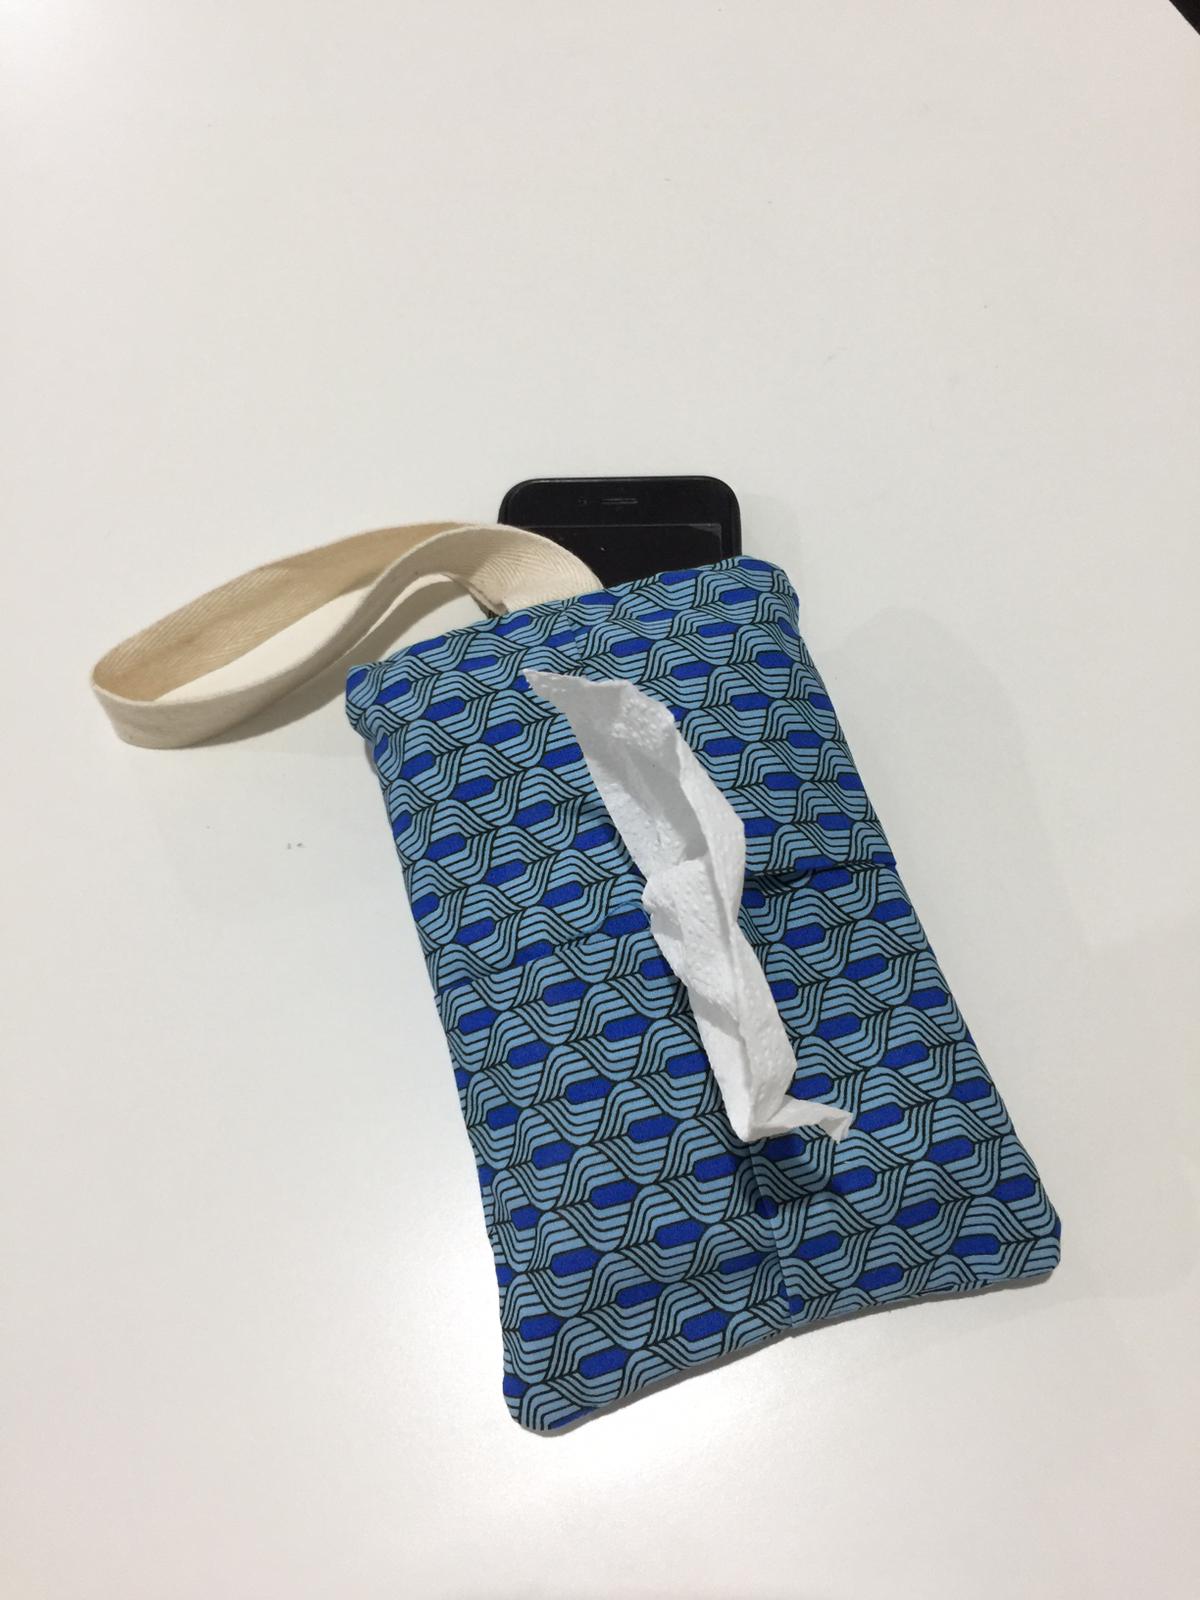 Intro To Sewing & Lunchtime Tissue Pouch